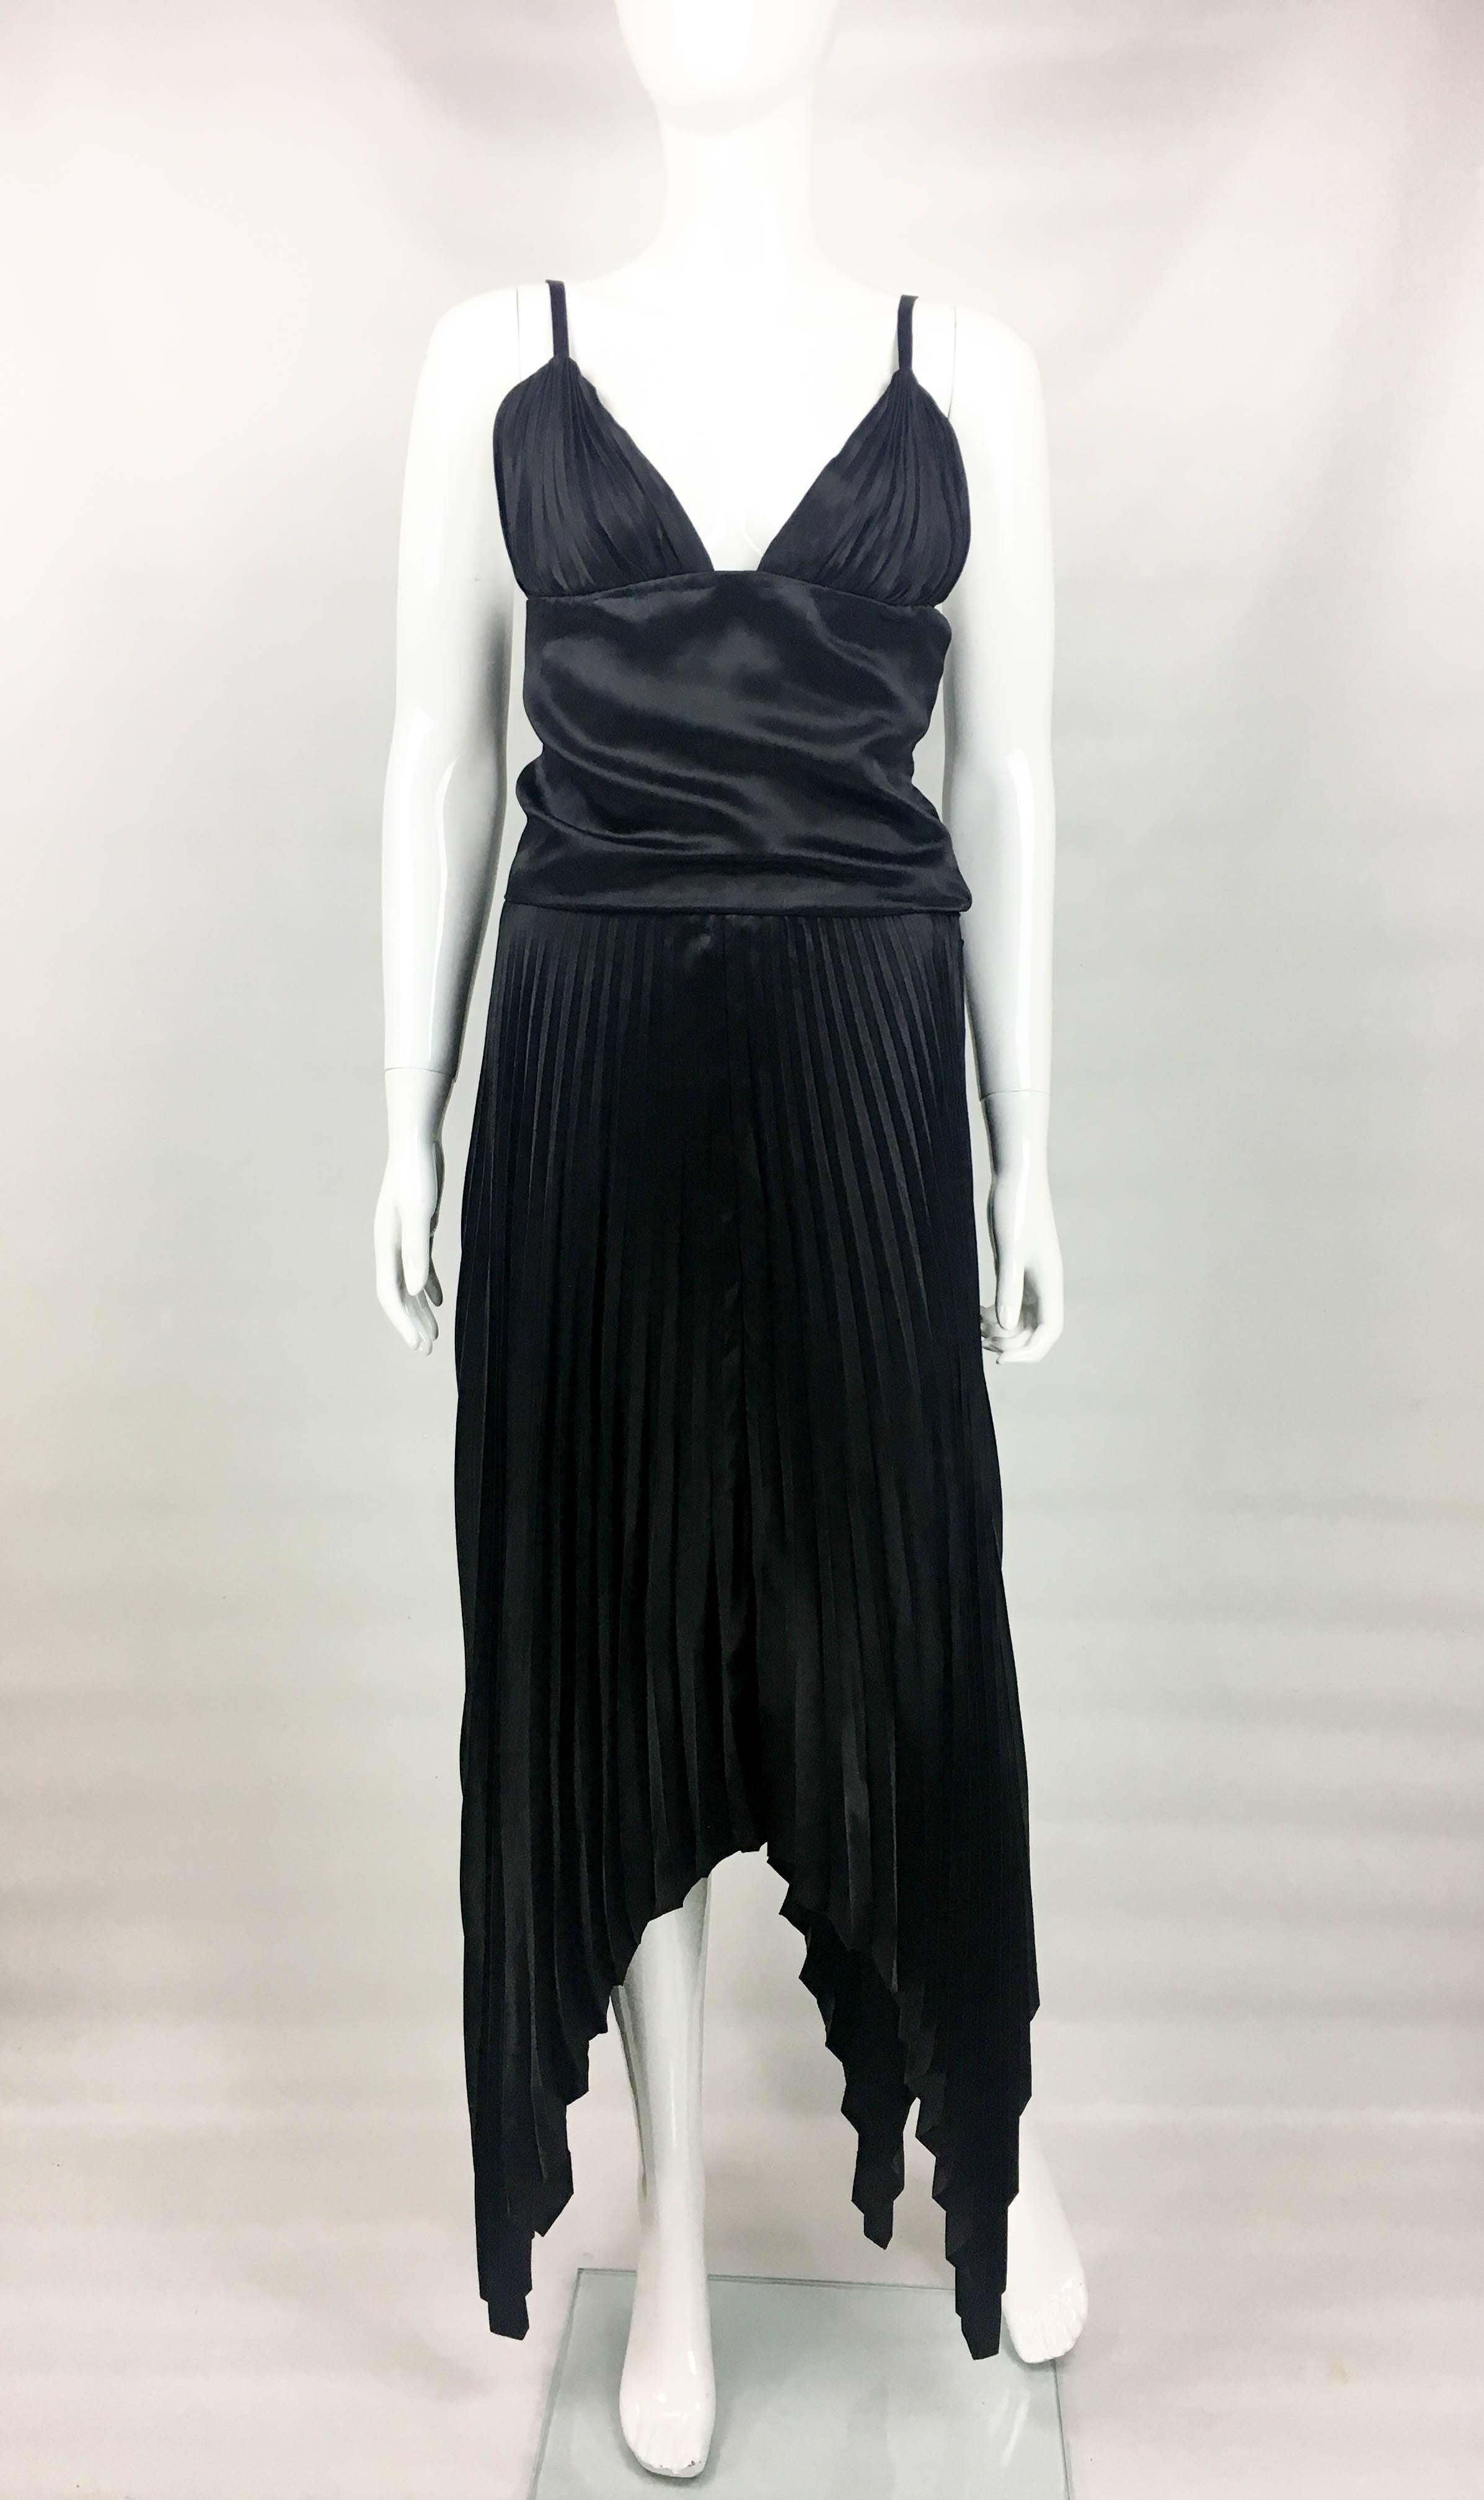 Dior by Marc Bohan Haute Couture Black Silk Pleated Dress, 1983  In Excellent Condition For Sale In London, Chelsea